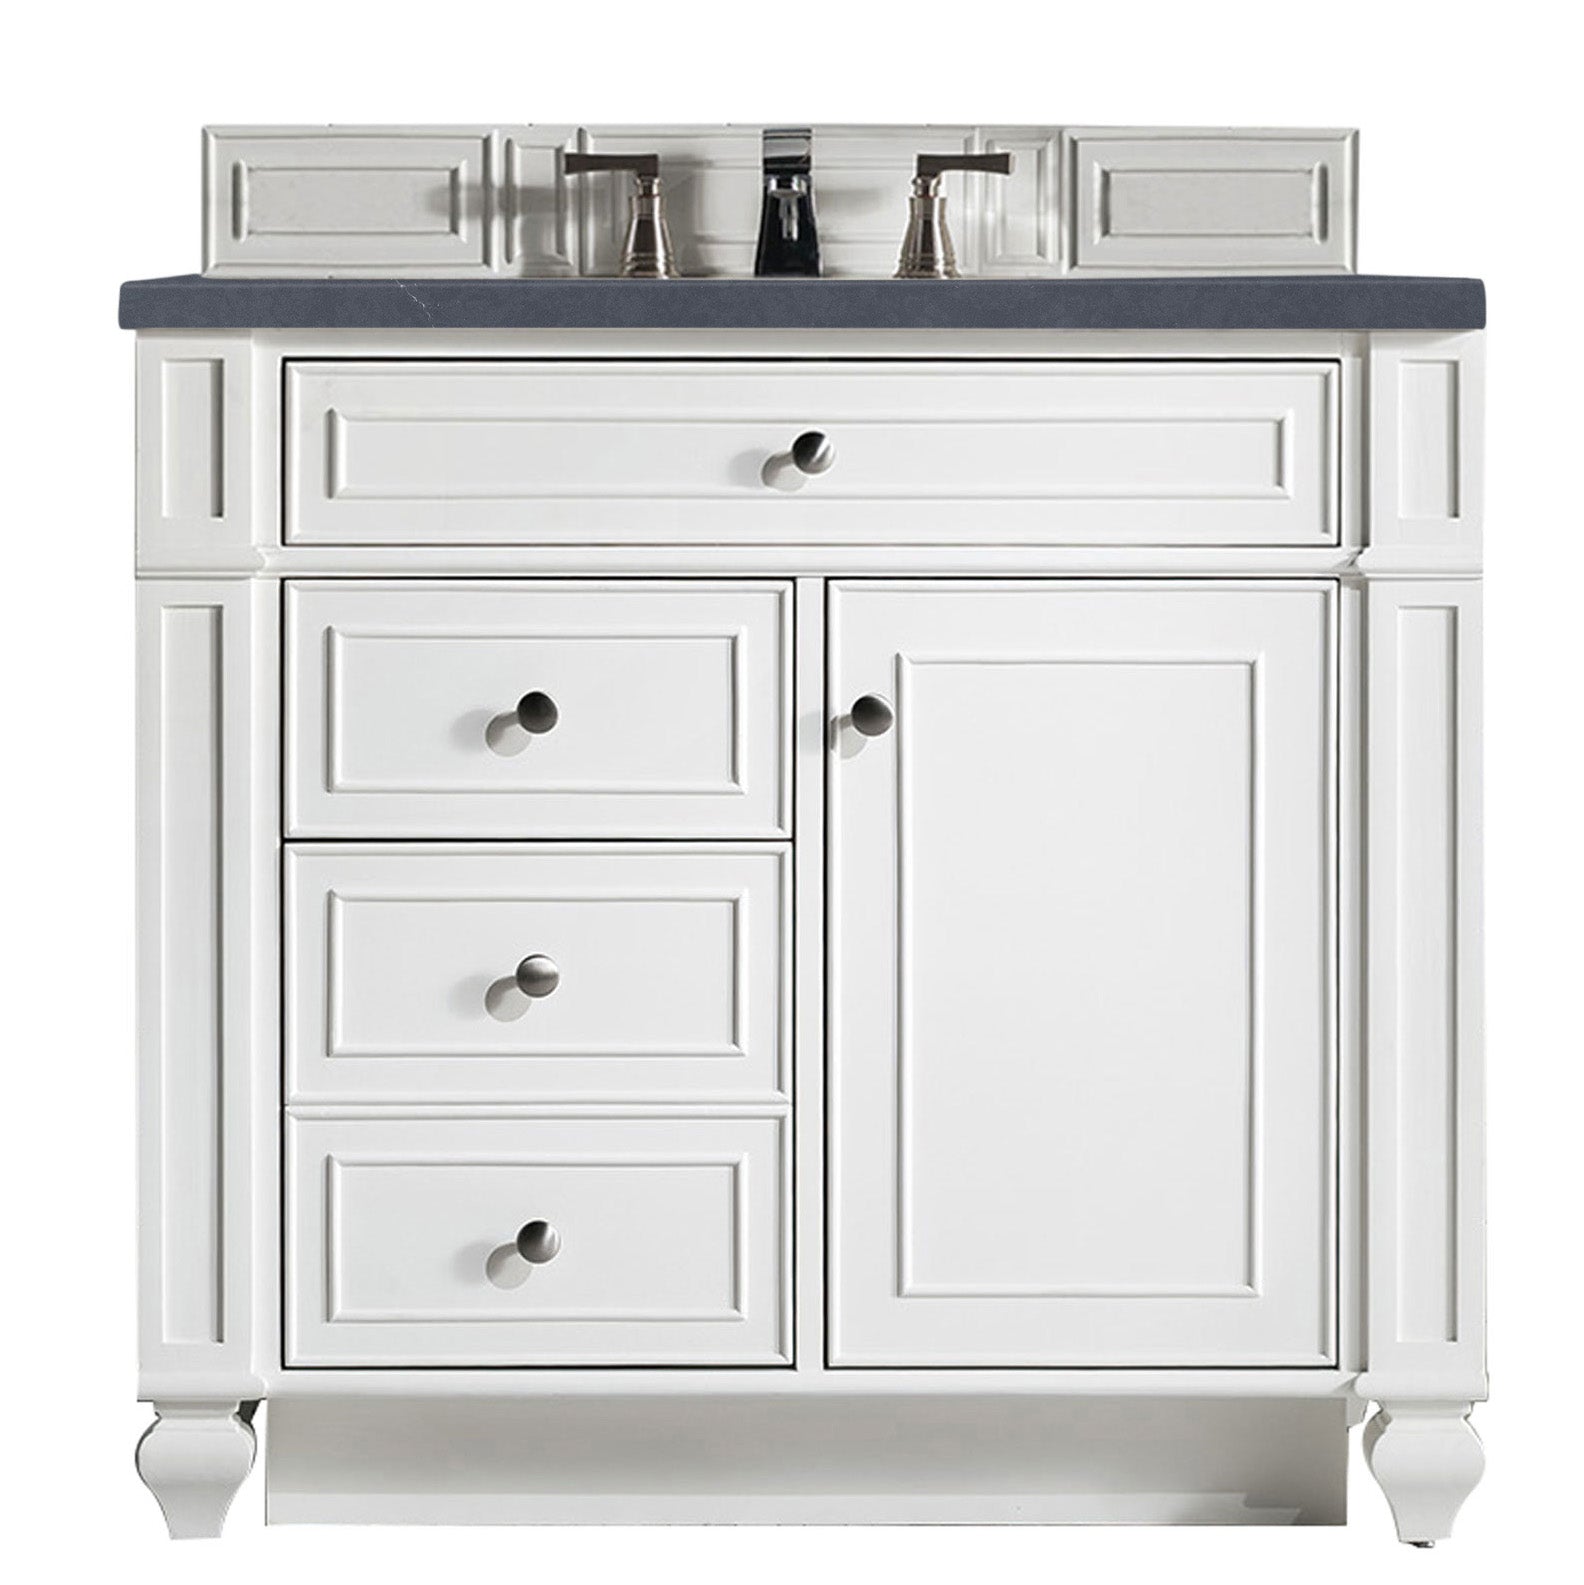 James Martin Vanities Bristol Collection 36 in. Single Vanity in Bright White with Countertop Options Charcoal Soapstone Quartz